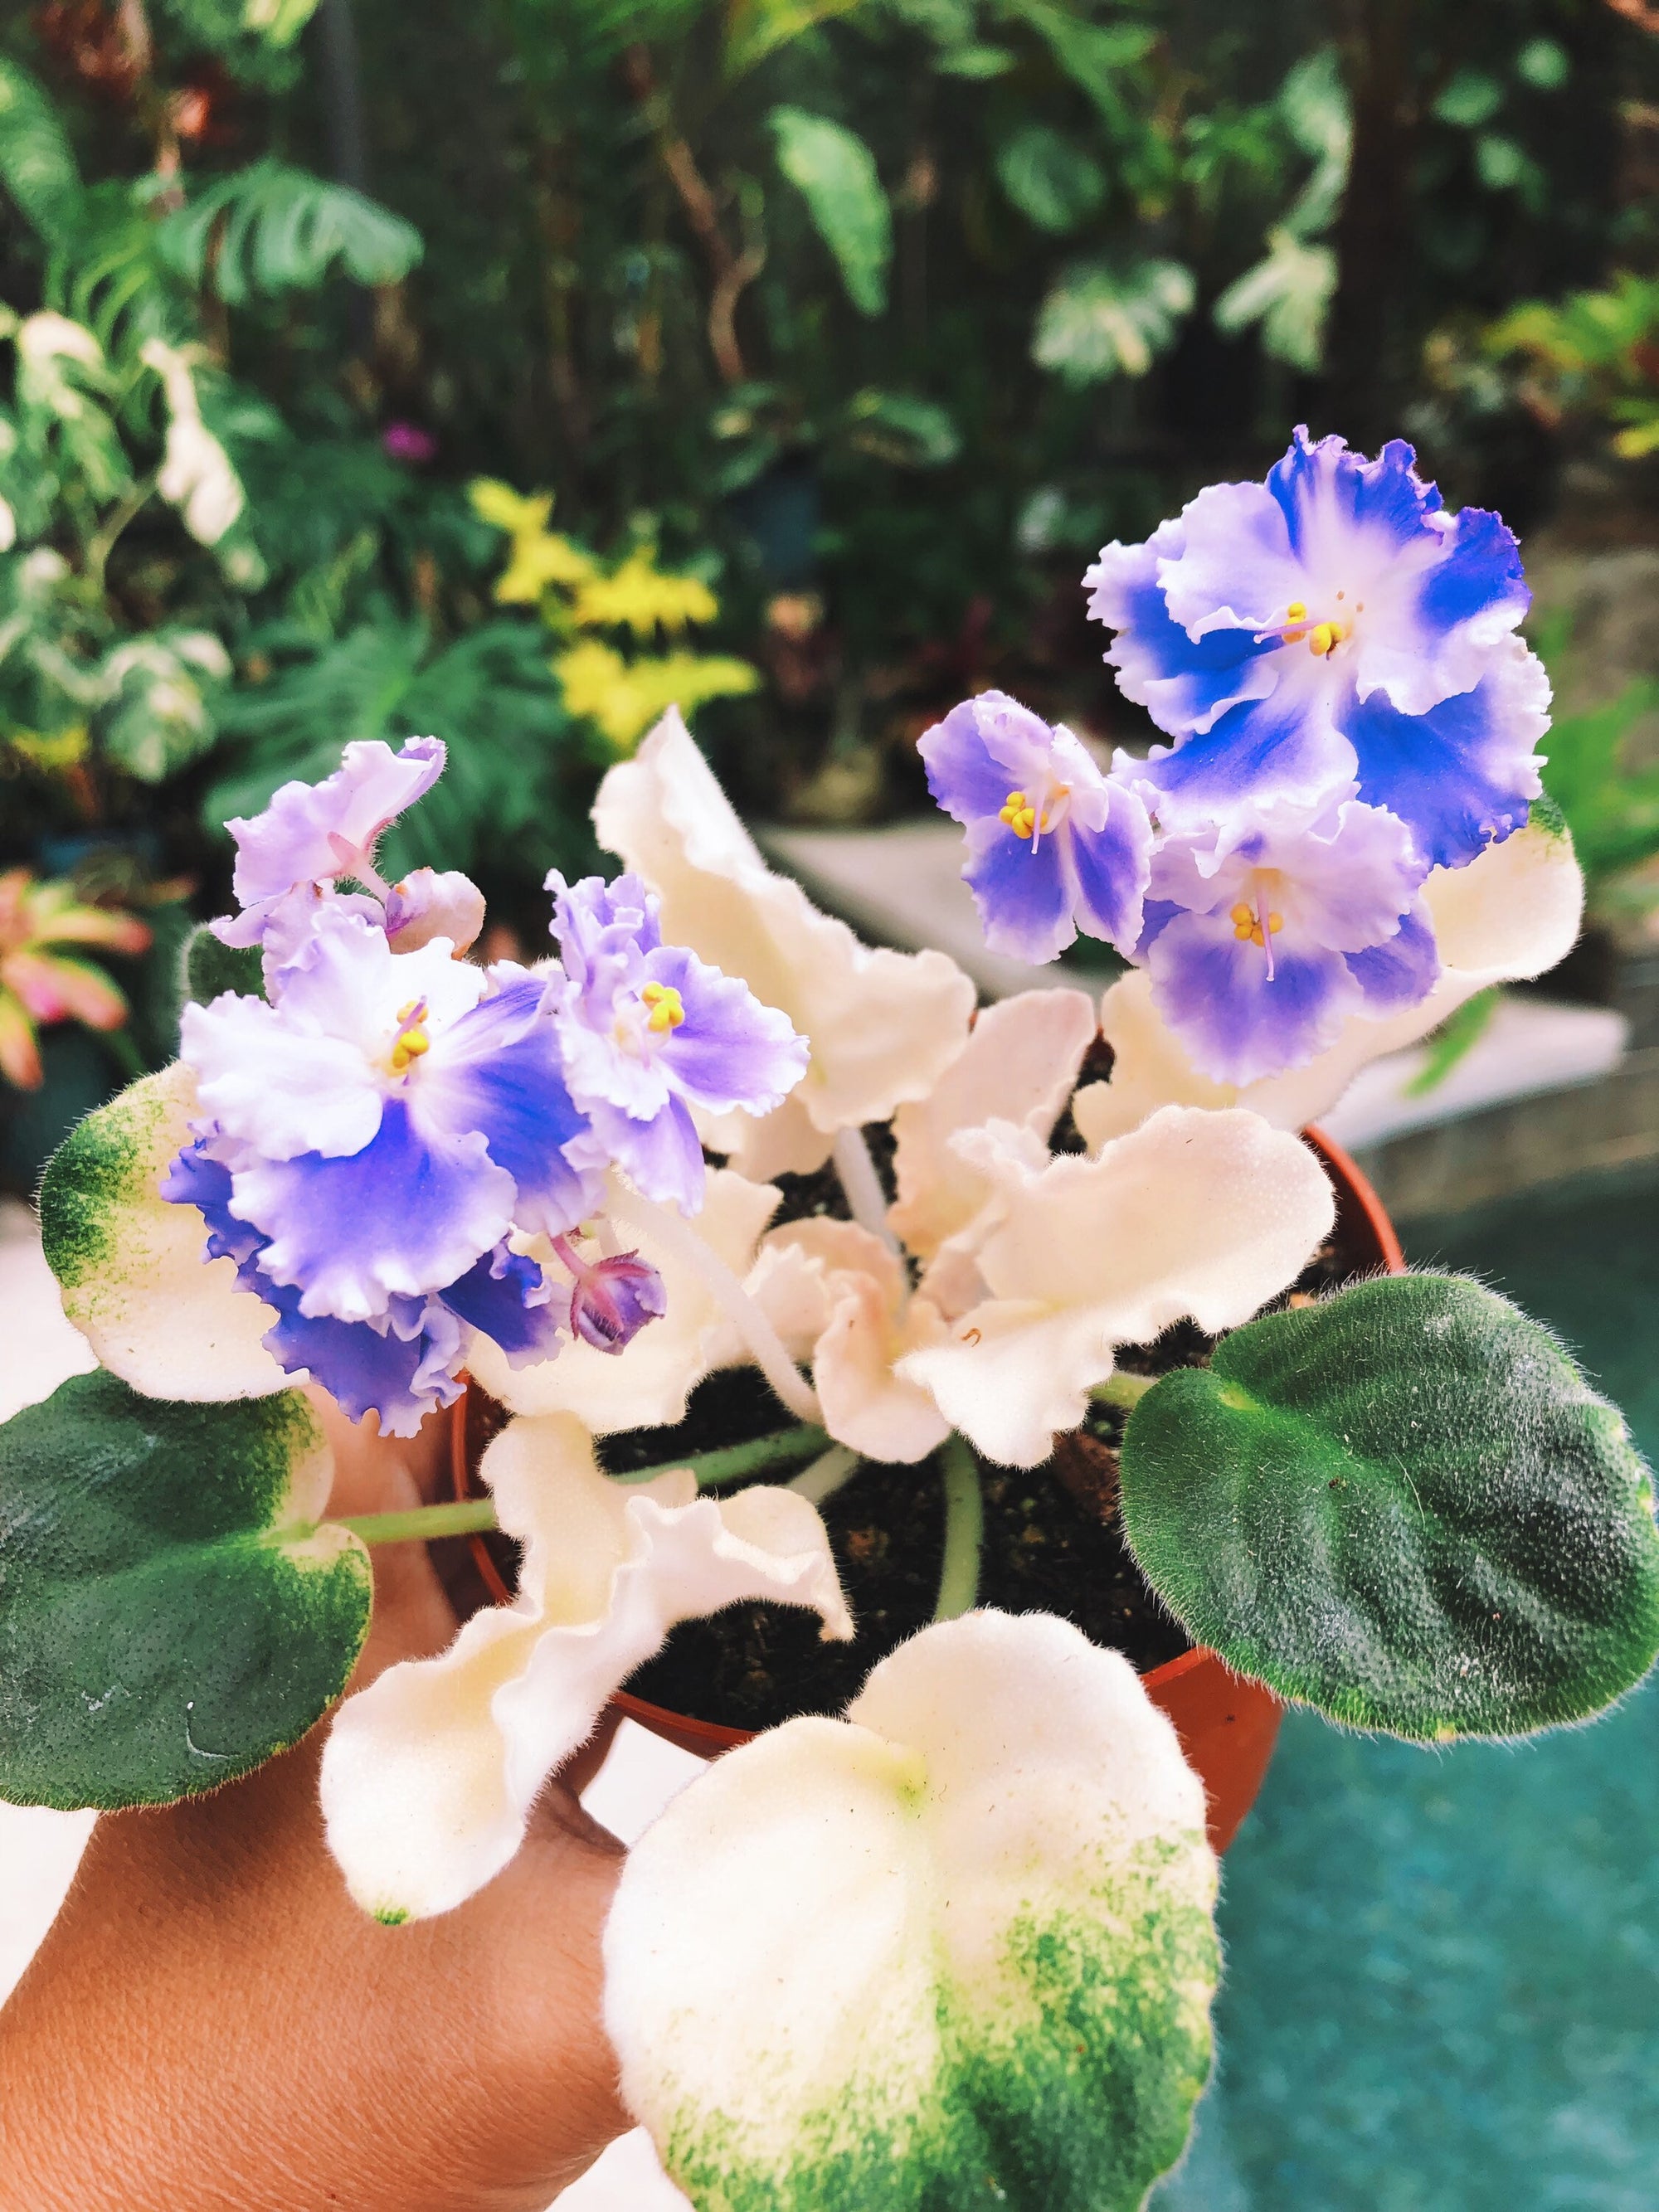 NEW RELEASE! Live house plant white purple bloom variegated African Violet ‘Harmony’s ‘Purple Passion’ garden 4” pot flower Potted gift